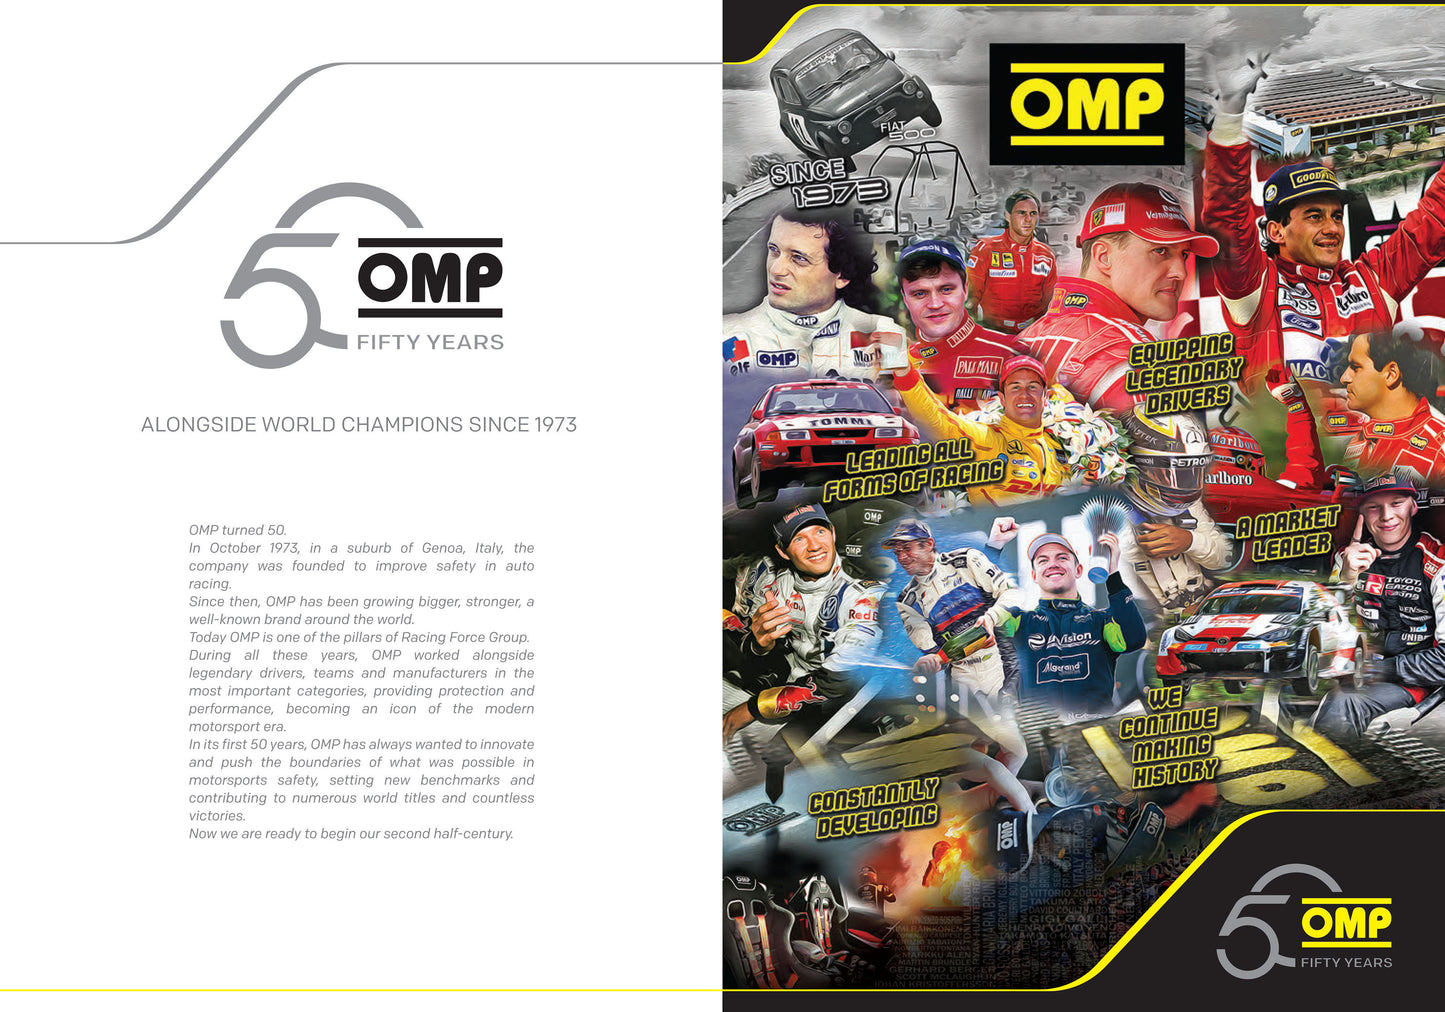 OMP First Evo Race Suit Latest Model Fireproof FIA Approved Motorsport Racing